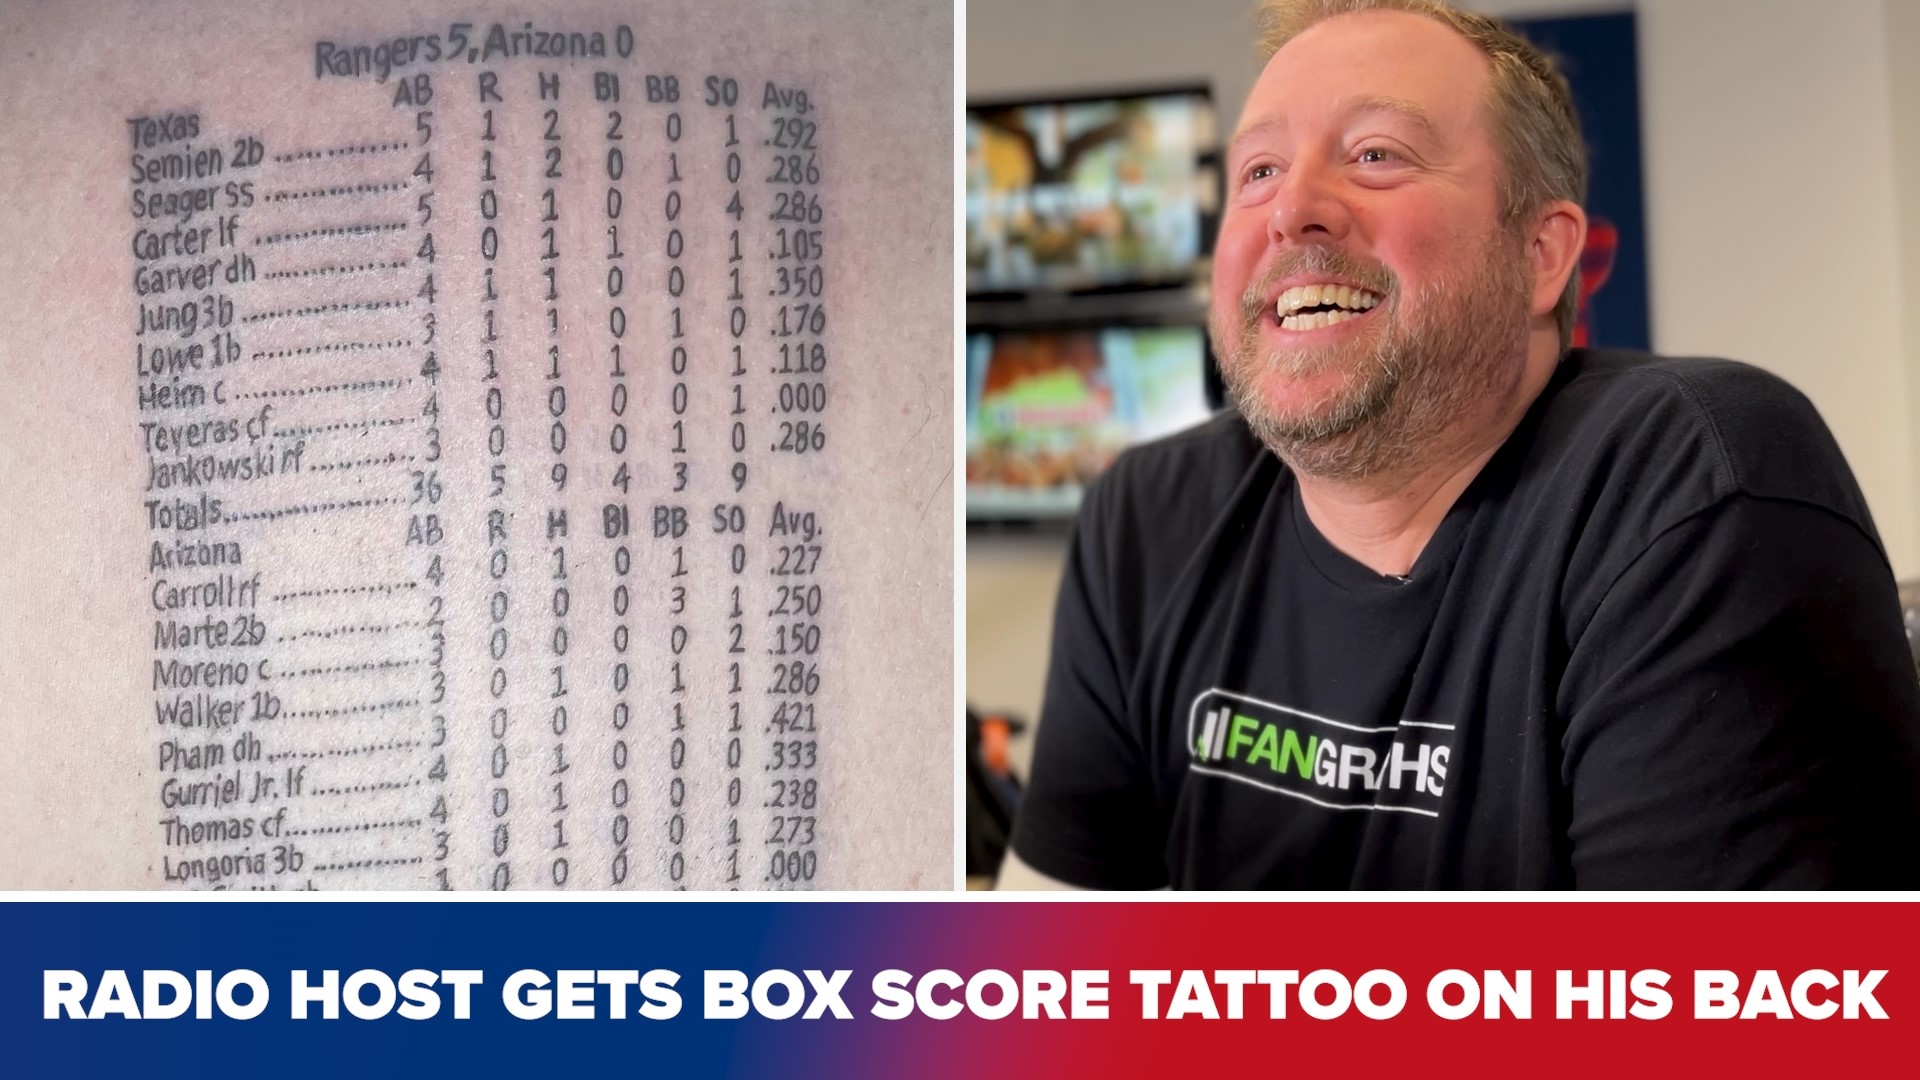 Sean Bass, co-host of "The Sweet Spot" on The Ticket in Dallas, Texas, recently got a Texas Rangers' box score tatooed on his back. Here is his full interview.